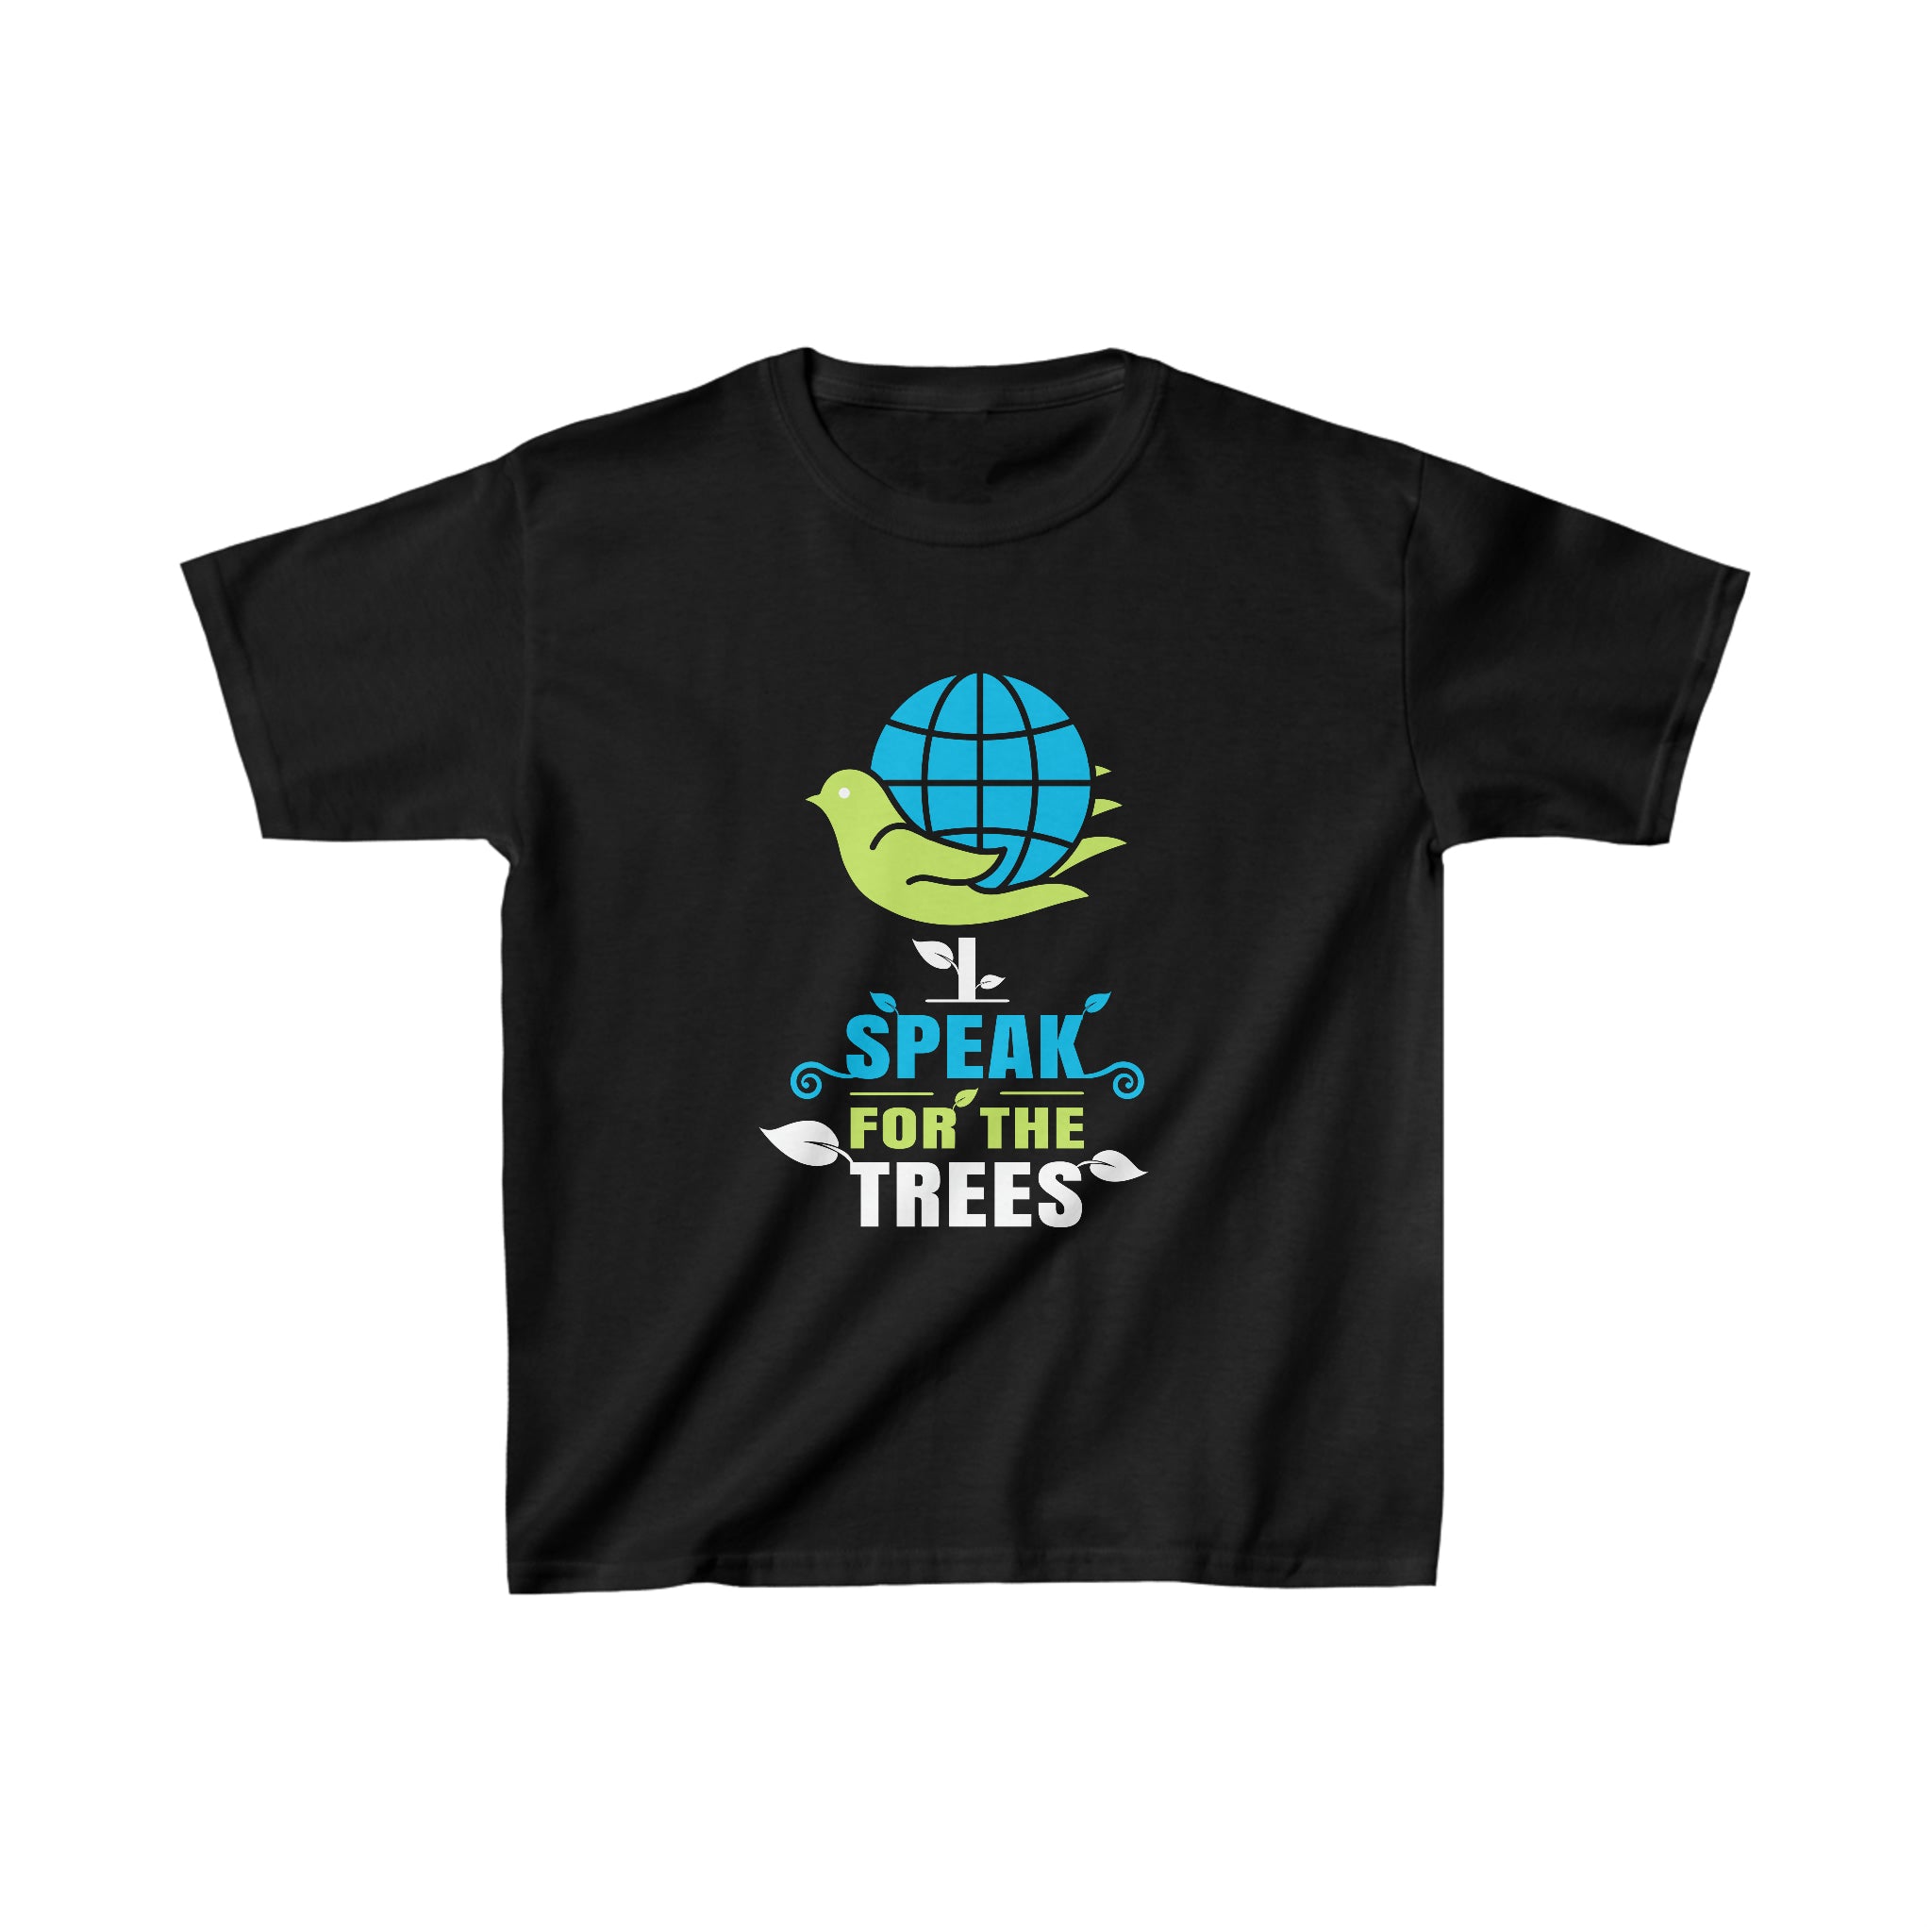 Nature Shirt I Speak For The Trees Save the Planet Boys T Shirts